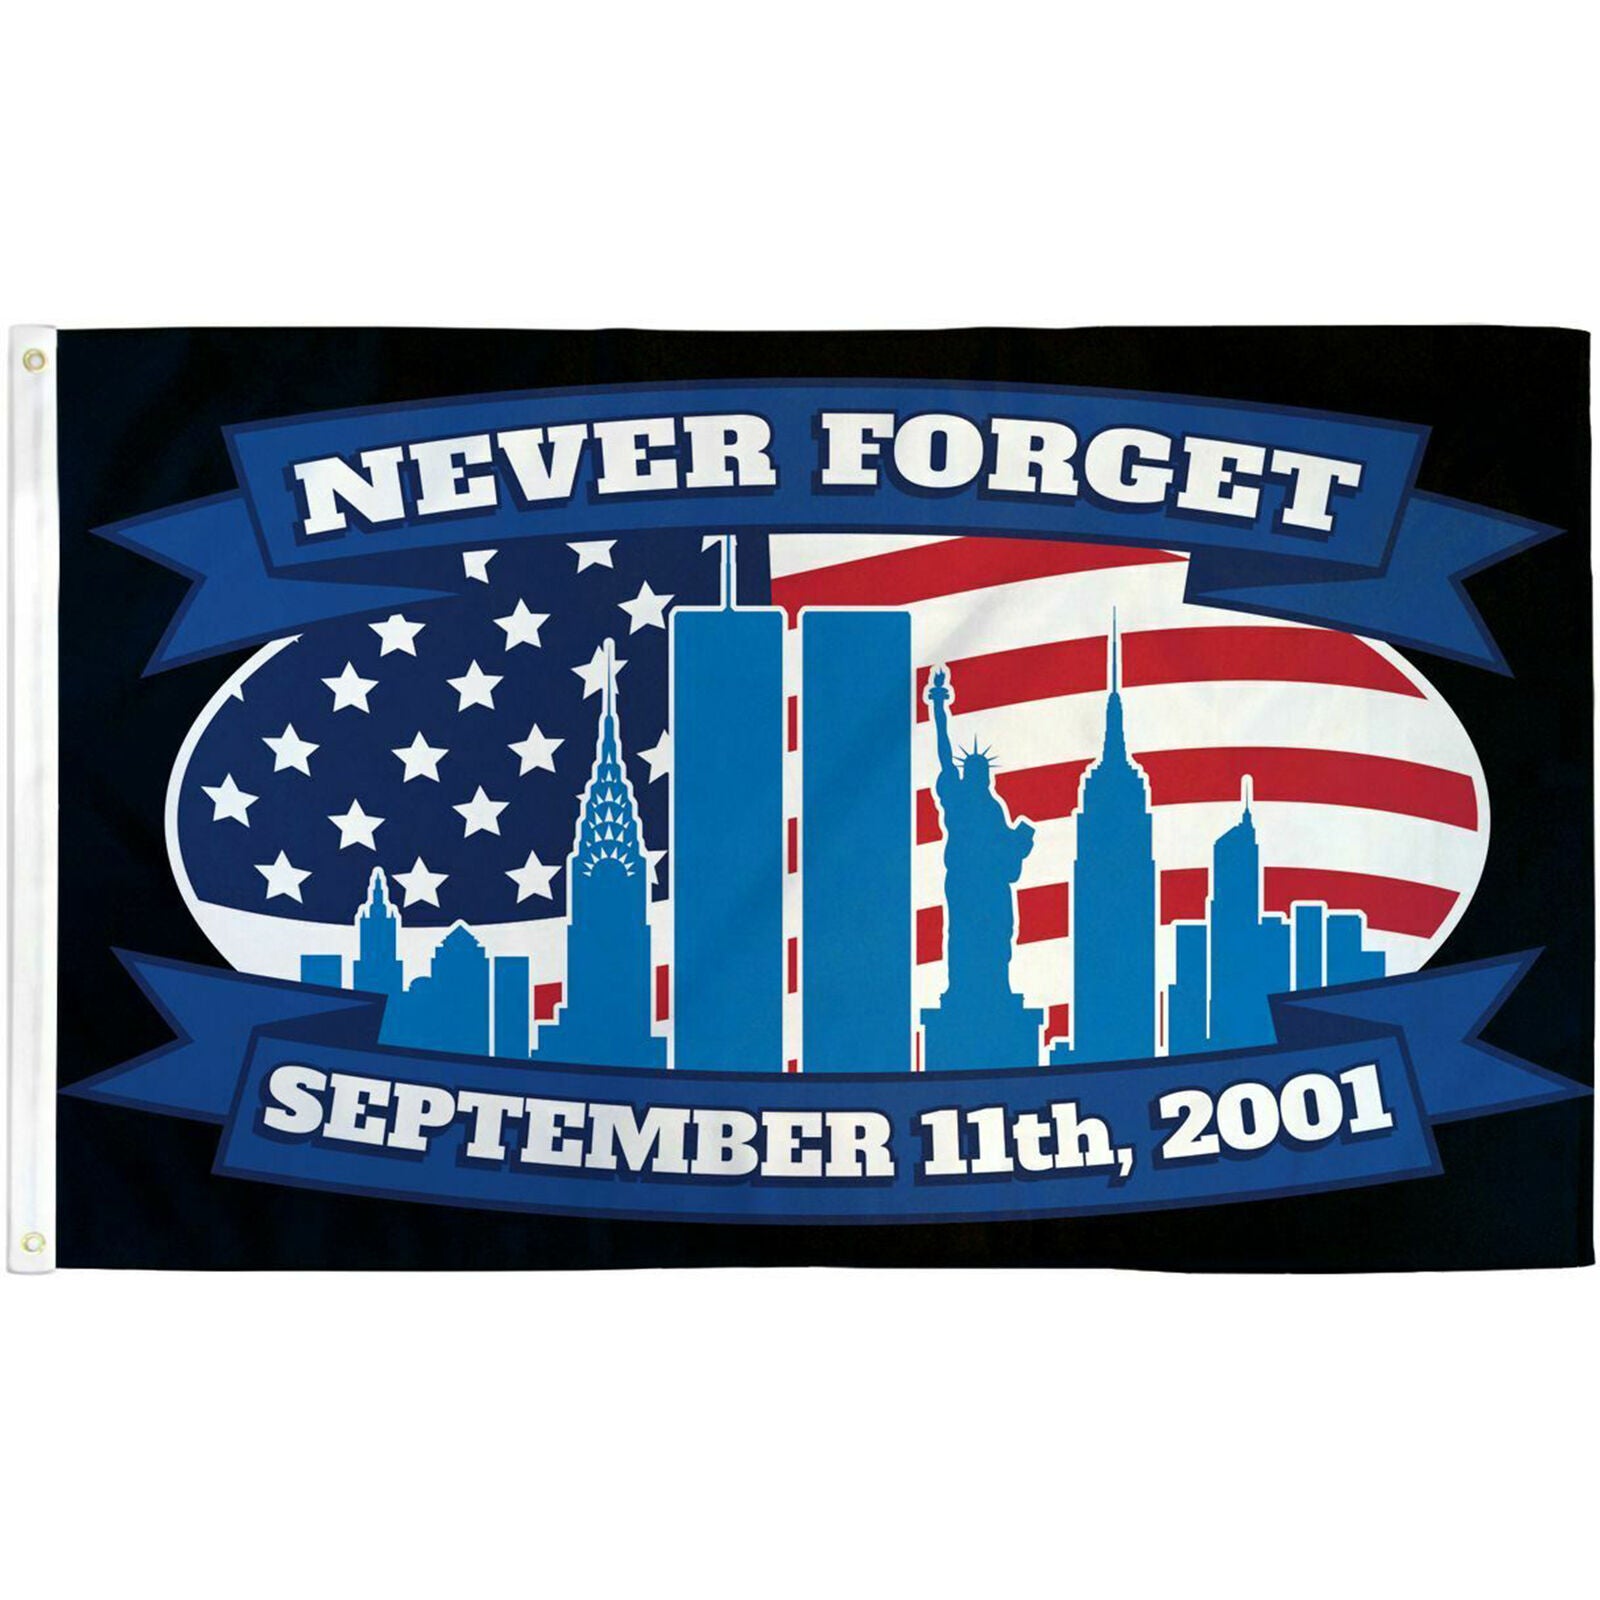 "9/11 NEVER FORGET (USA)" flag 3x5 ft poly banner